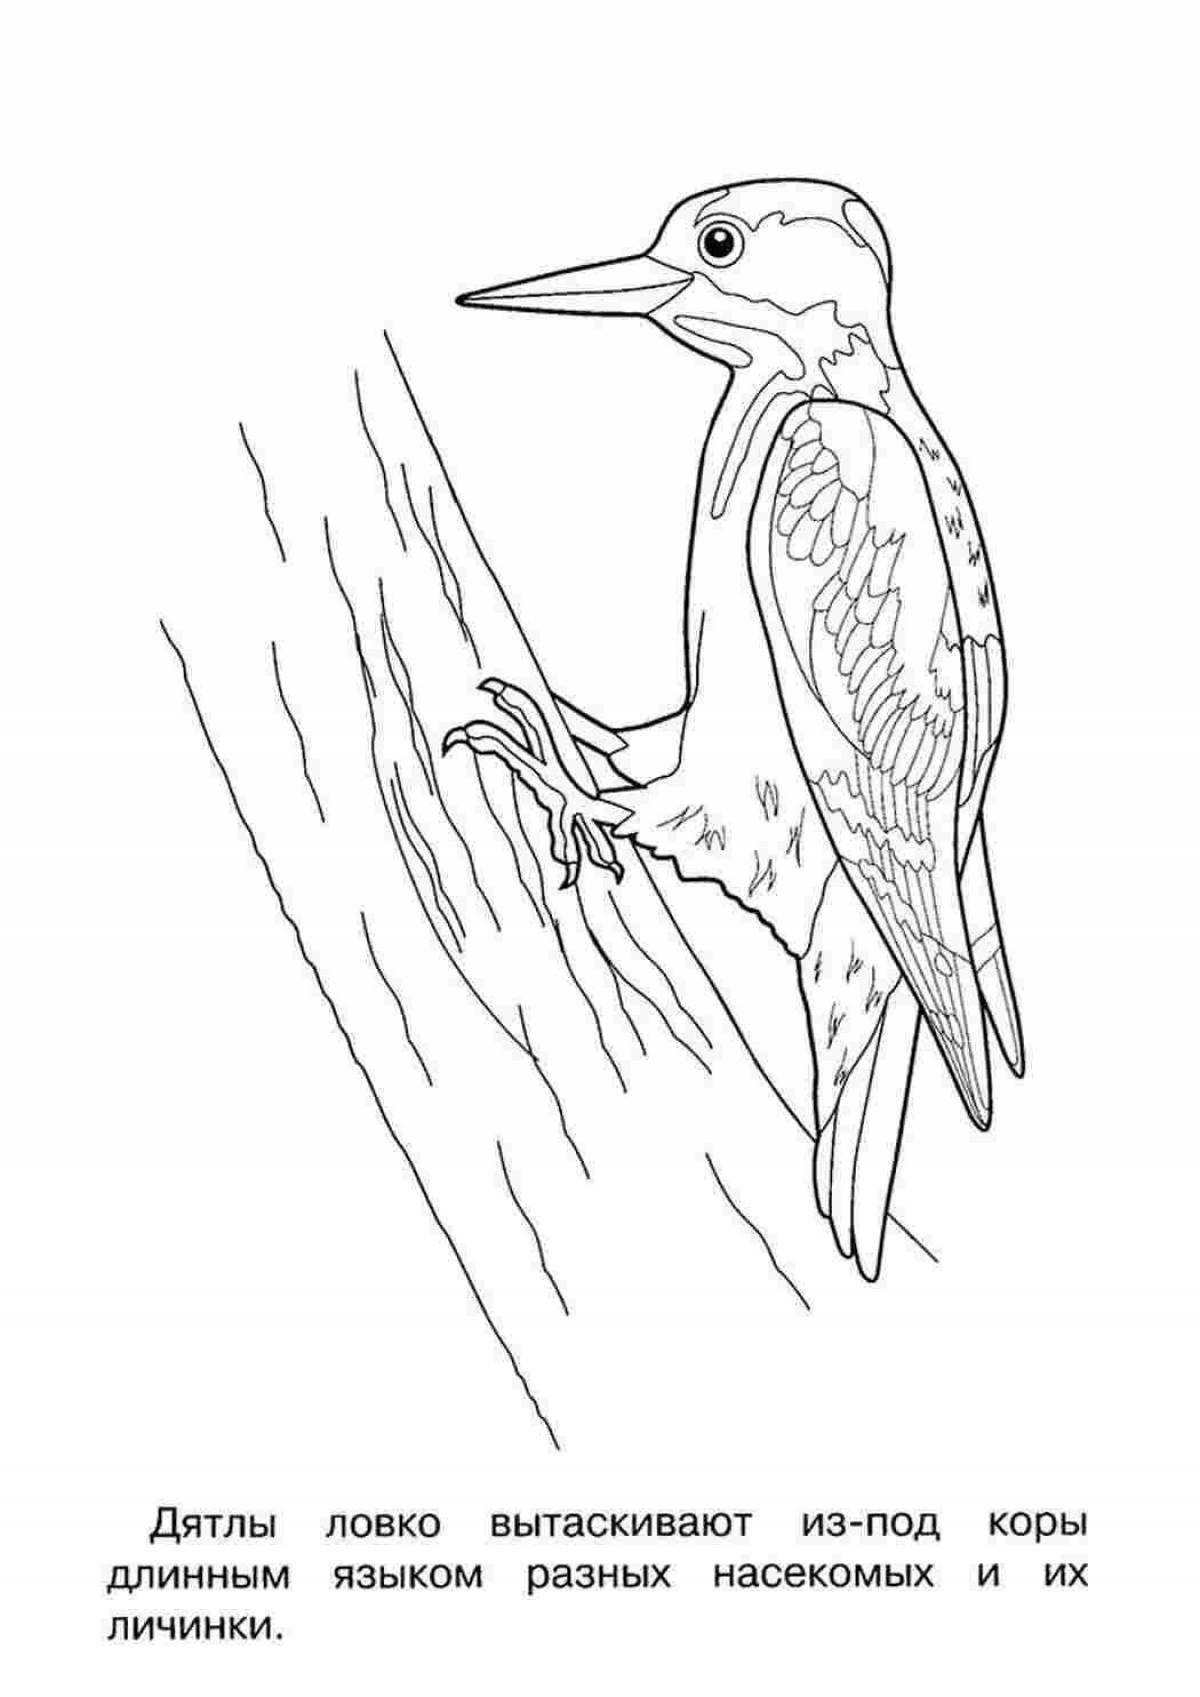 Attractive woodpecker coloring book for 6-7 year olds